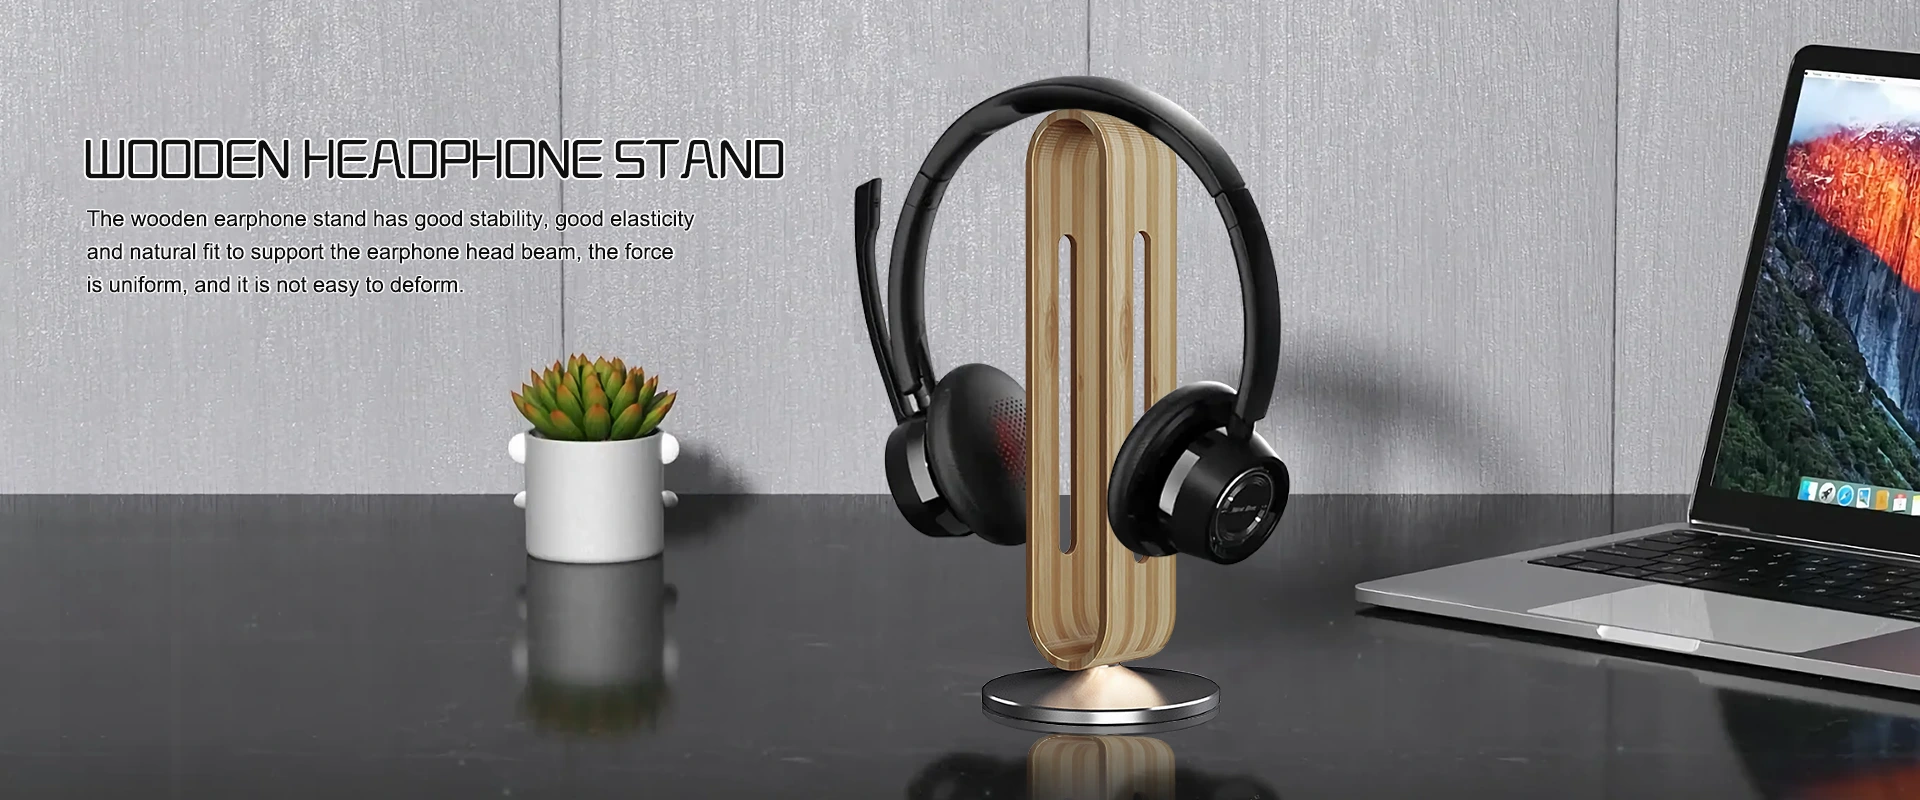 Headphone Stand Manufacture